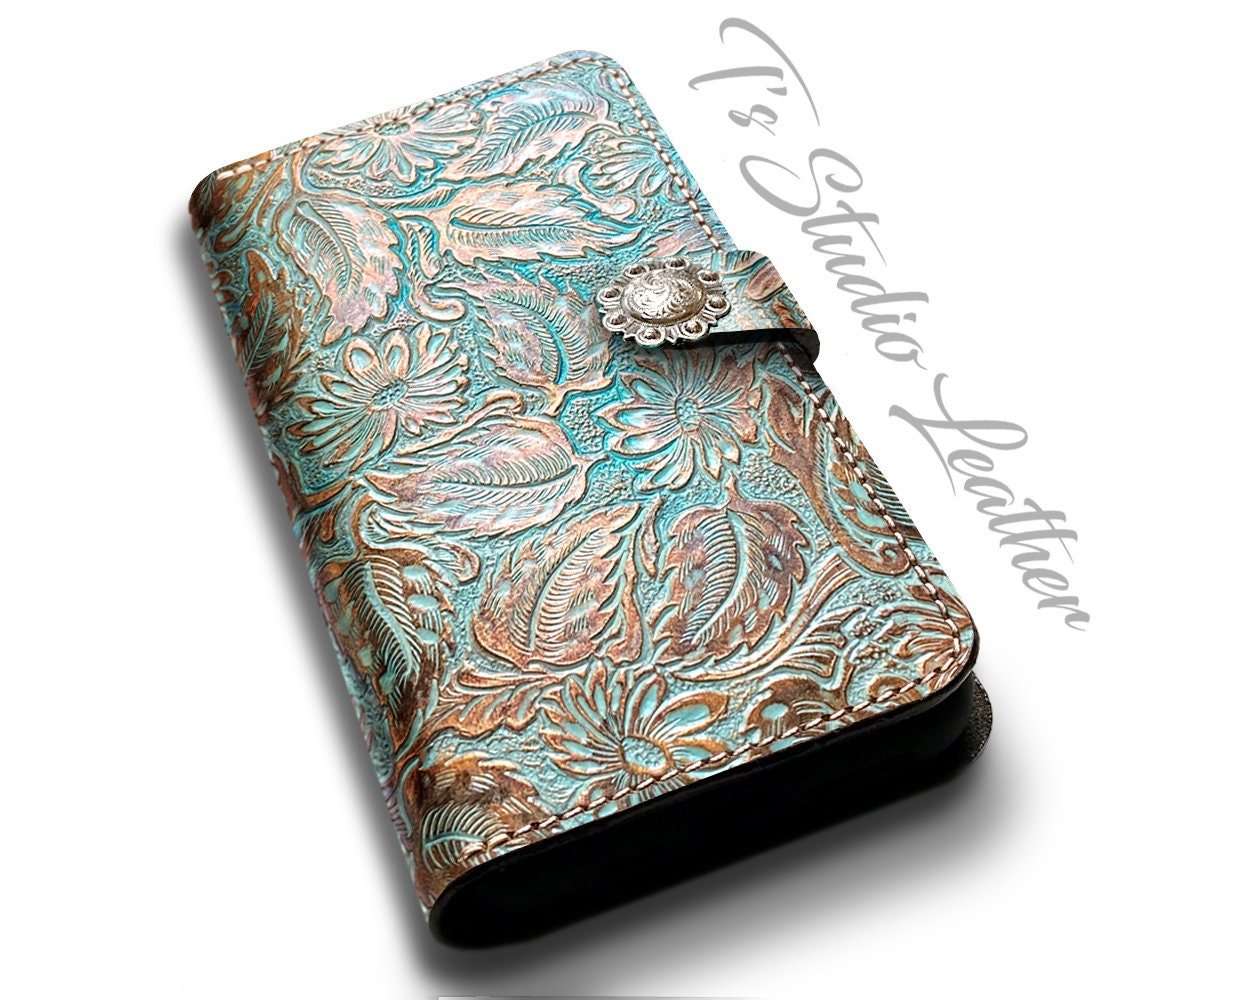 Blue Ostrich Emu Textured Cowhide Leather Wallet Style Phone Case